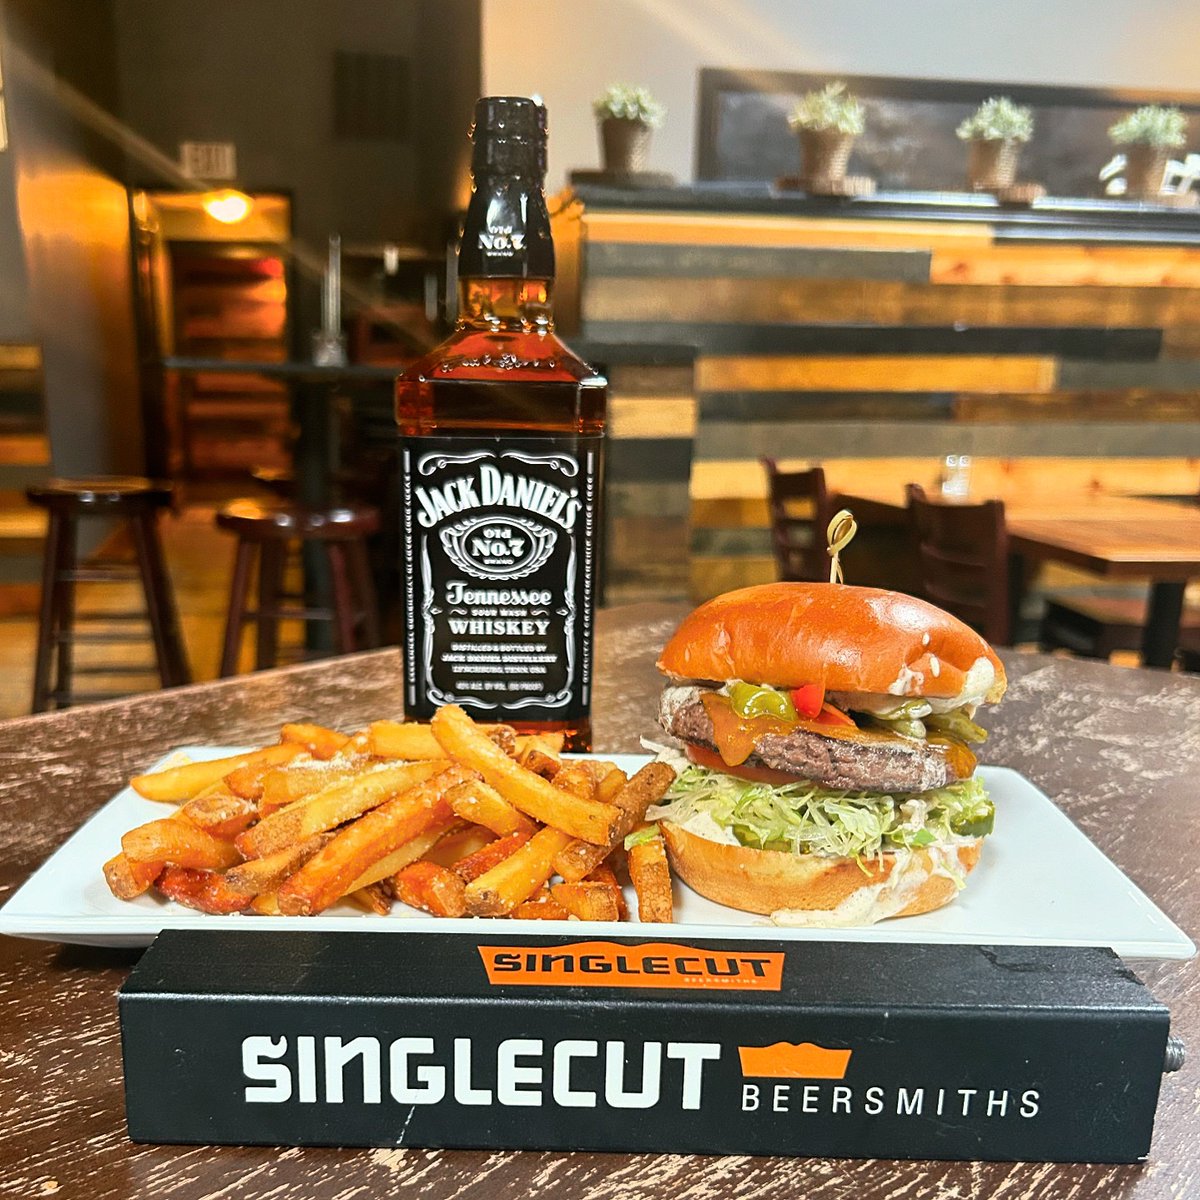 🚨 Every Tuesday… A burger, a beer & a whiskey - all for just $20! Tonight: 🍔 𝐀 𝐁𝐮𝐫𝐠𝐞𝐫 - Cheddar, Long Hots, Lettuce, Tomato, Pickles, Whiskey Aioli, Truffle Parm Fries 🍺 𝐀 𝐁𝐞𝐞𝐫 - SingleCut 18-Watt Session IPA 🥃 𝐀 𝐖𝐡𝐢𝐬𝐤𝐞𝐲 - Jack Daniel’s #urbansaloon